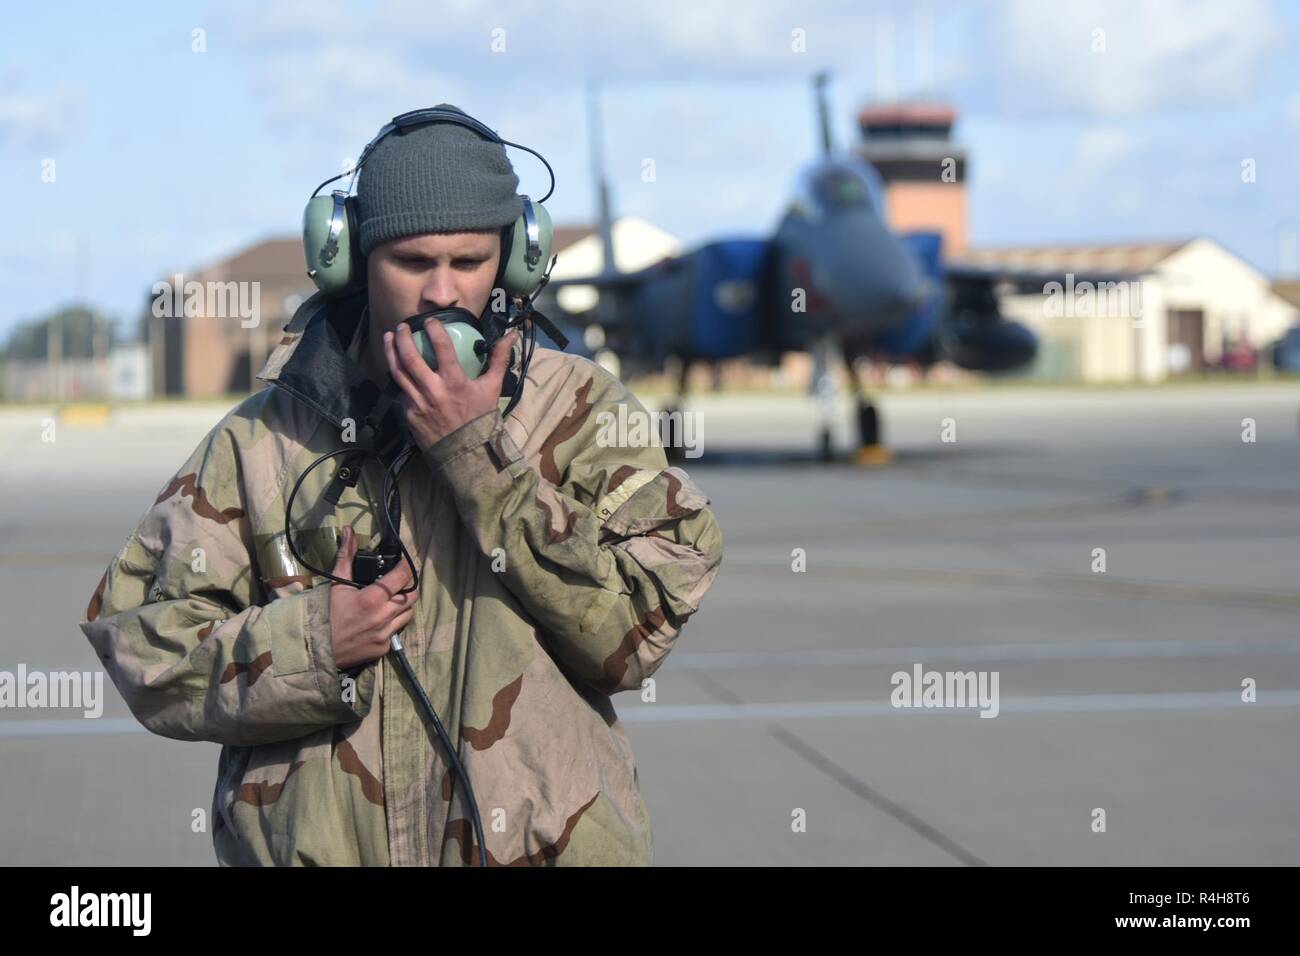 An Airman assigned to the 492nd Fighter Squadron communicates with pilots before departure during the “FURIOUS 48” readiness exercise at Royal Air Force Lakenheath, England, Oct. 1, 2018. Exercises like this provide both aircrew and support personnel stationed at RAF Lakenheath the experience needed to maintain a ready force capable of ensuring the collective defense of the NATO alliance. Stock Photo